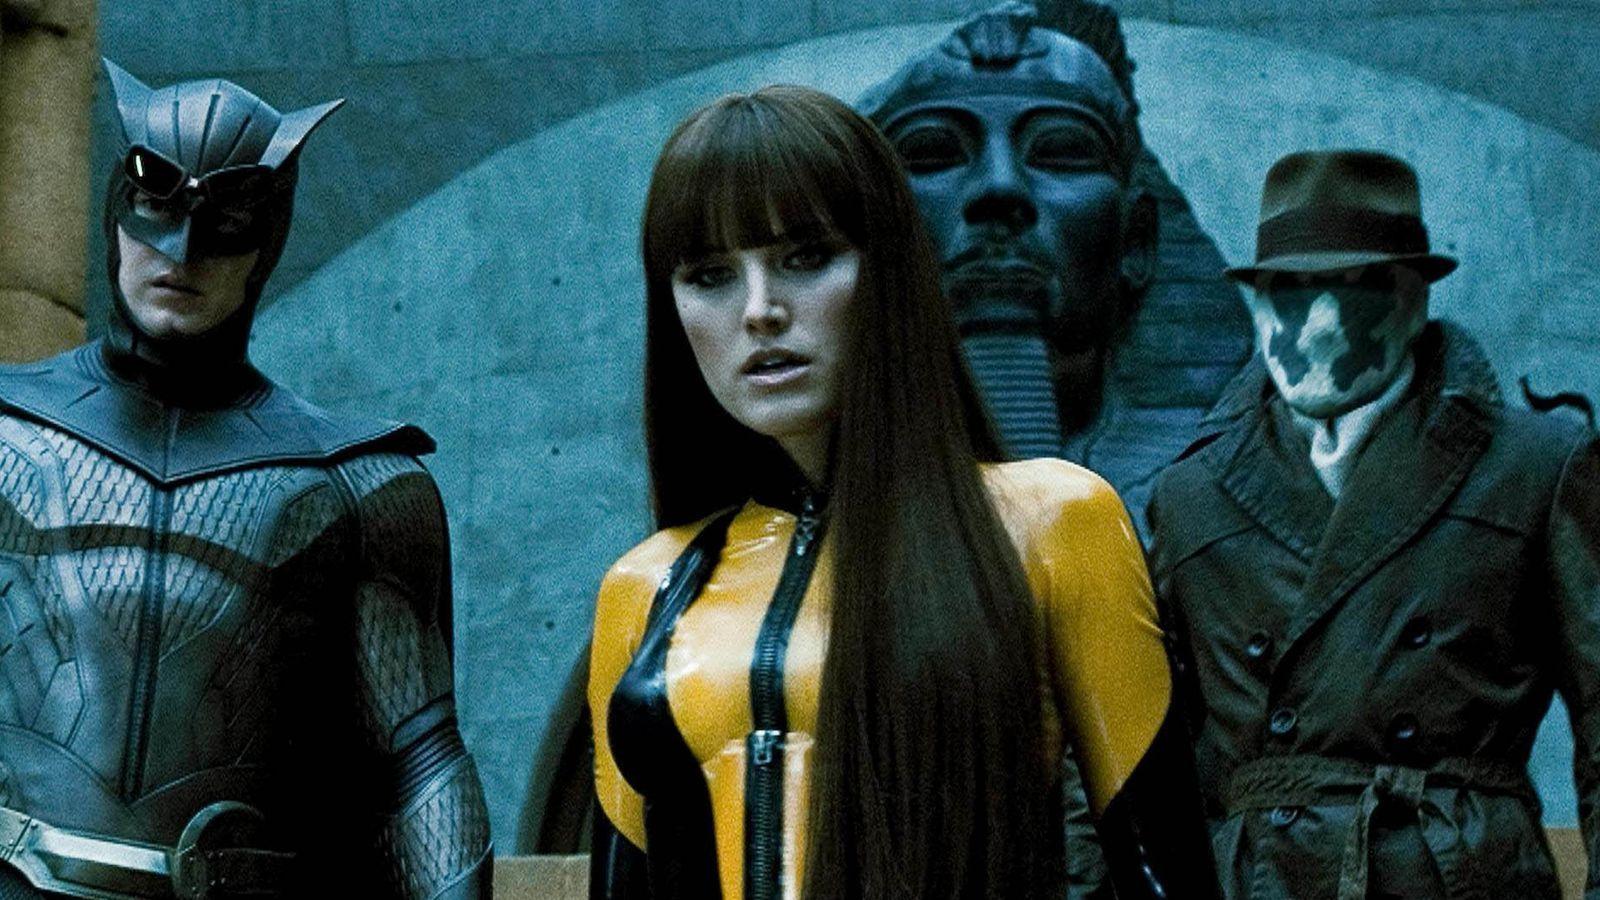 Watchmen HBO Series (2019): What We Know So Far